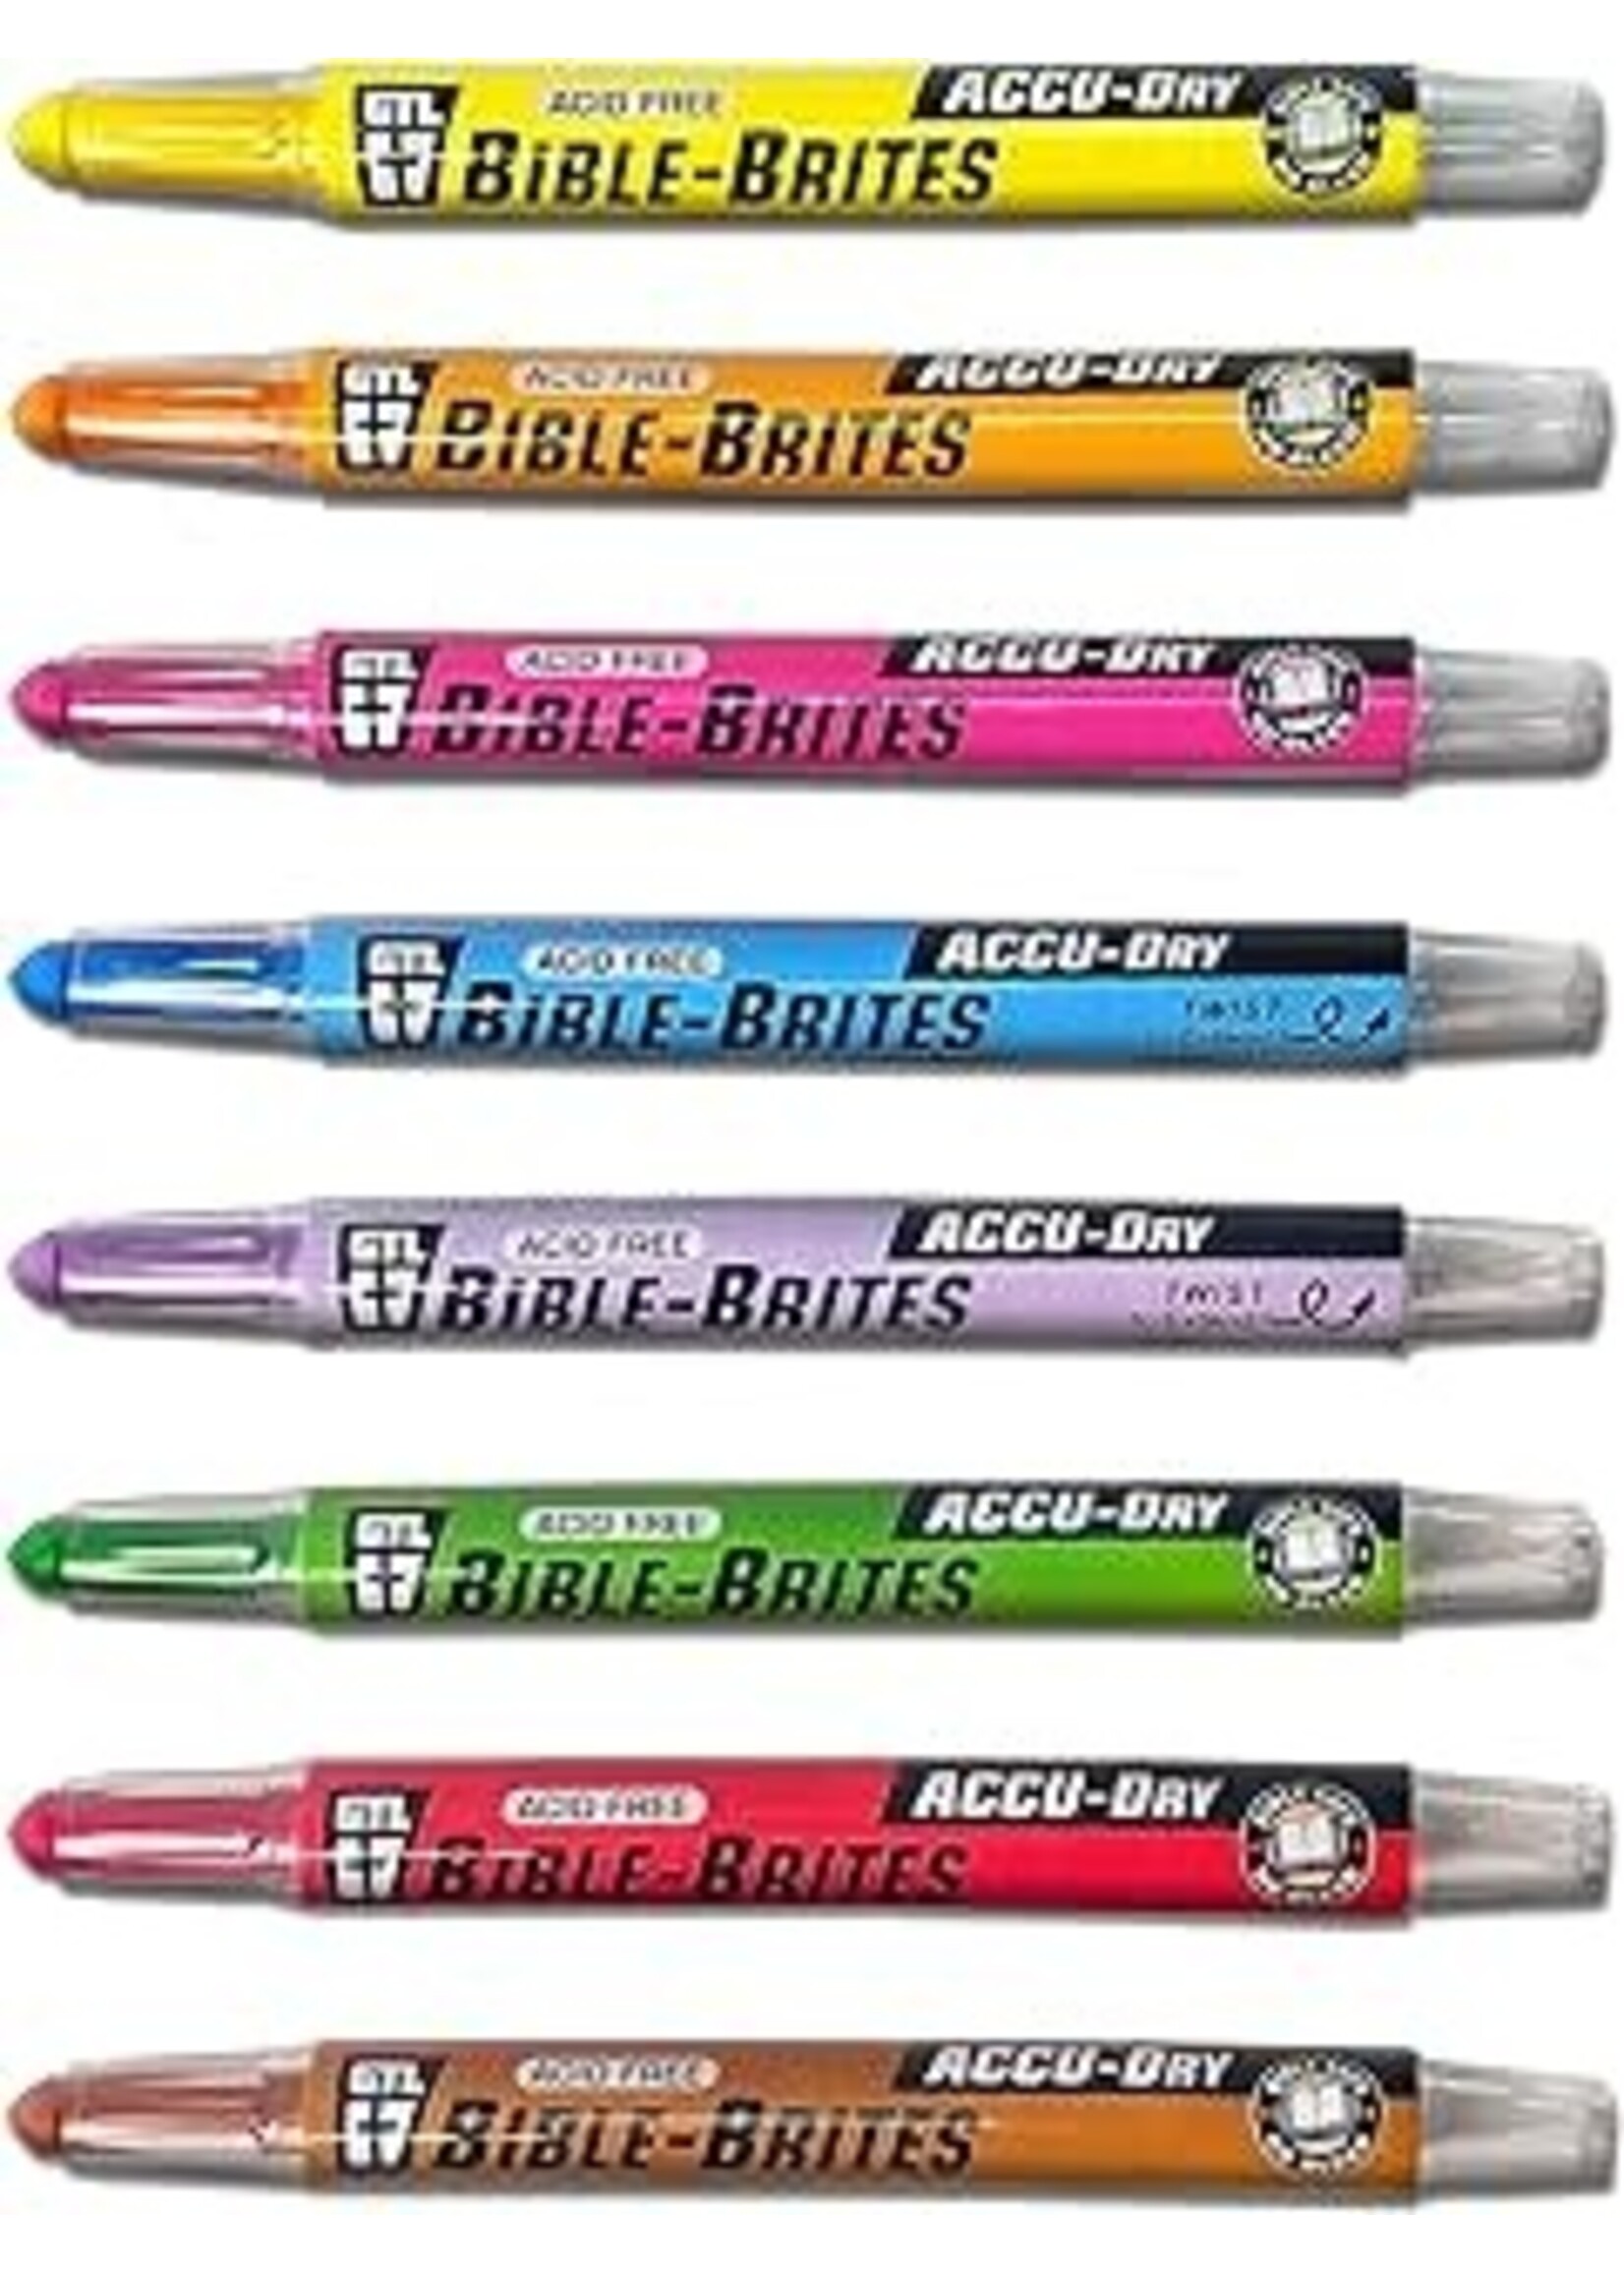 ACCU-DRY BIBLE BRITES HIGHLIGHTERS